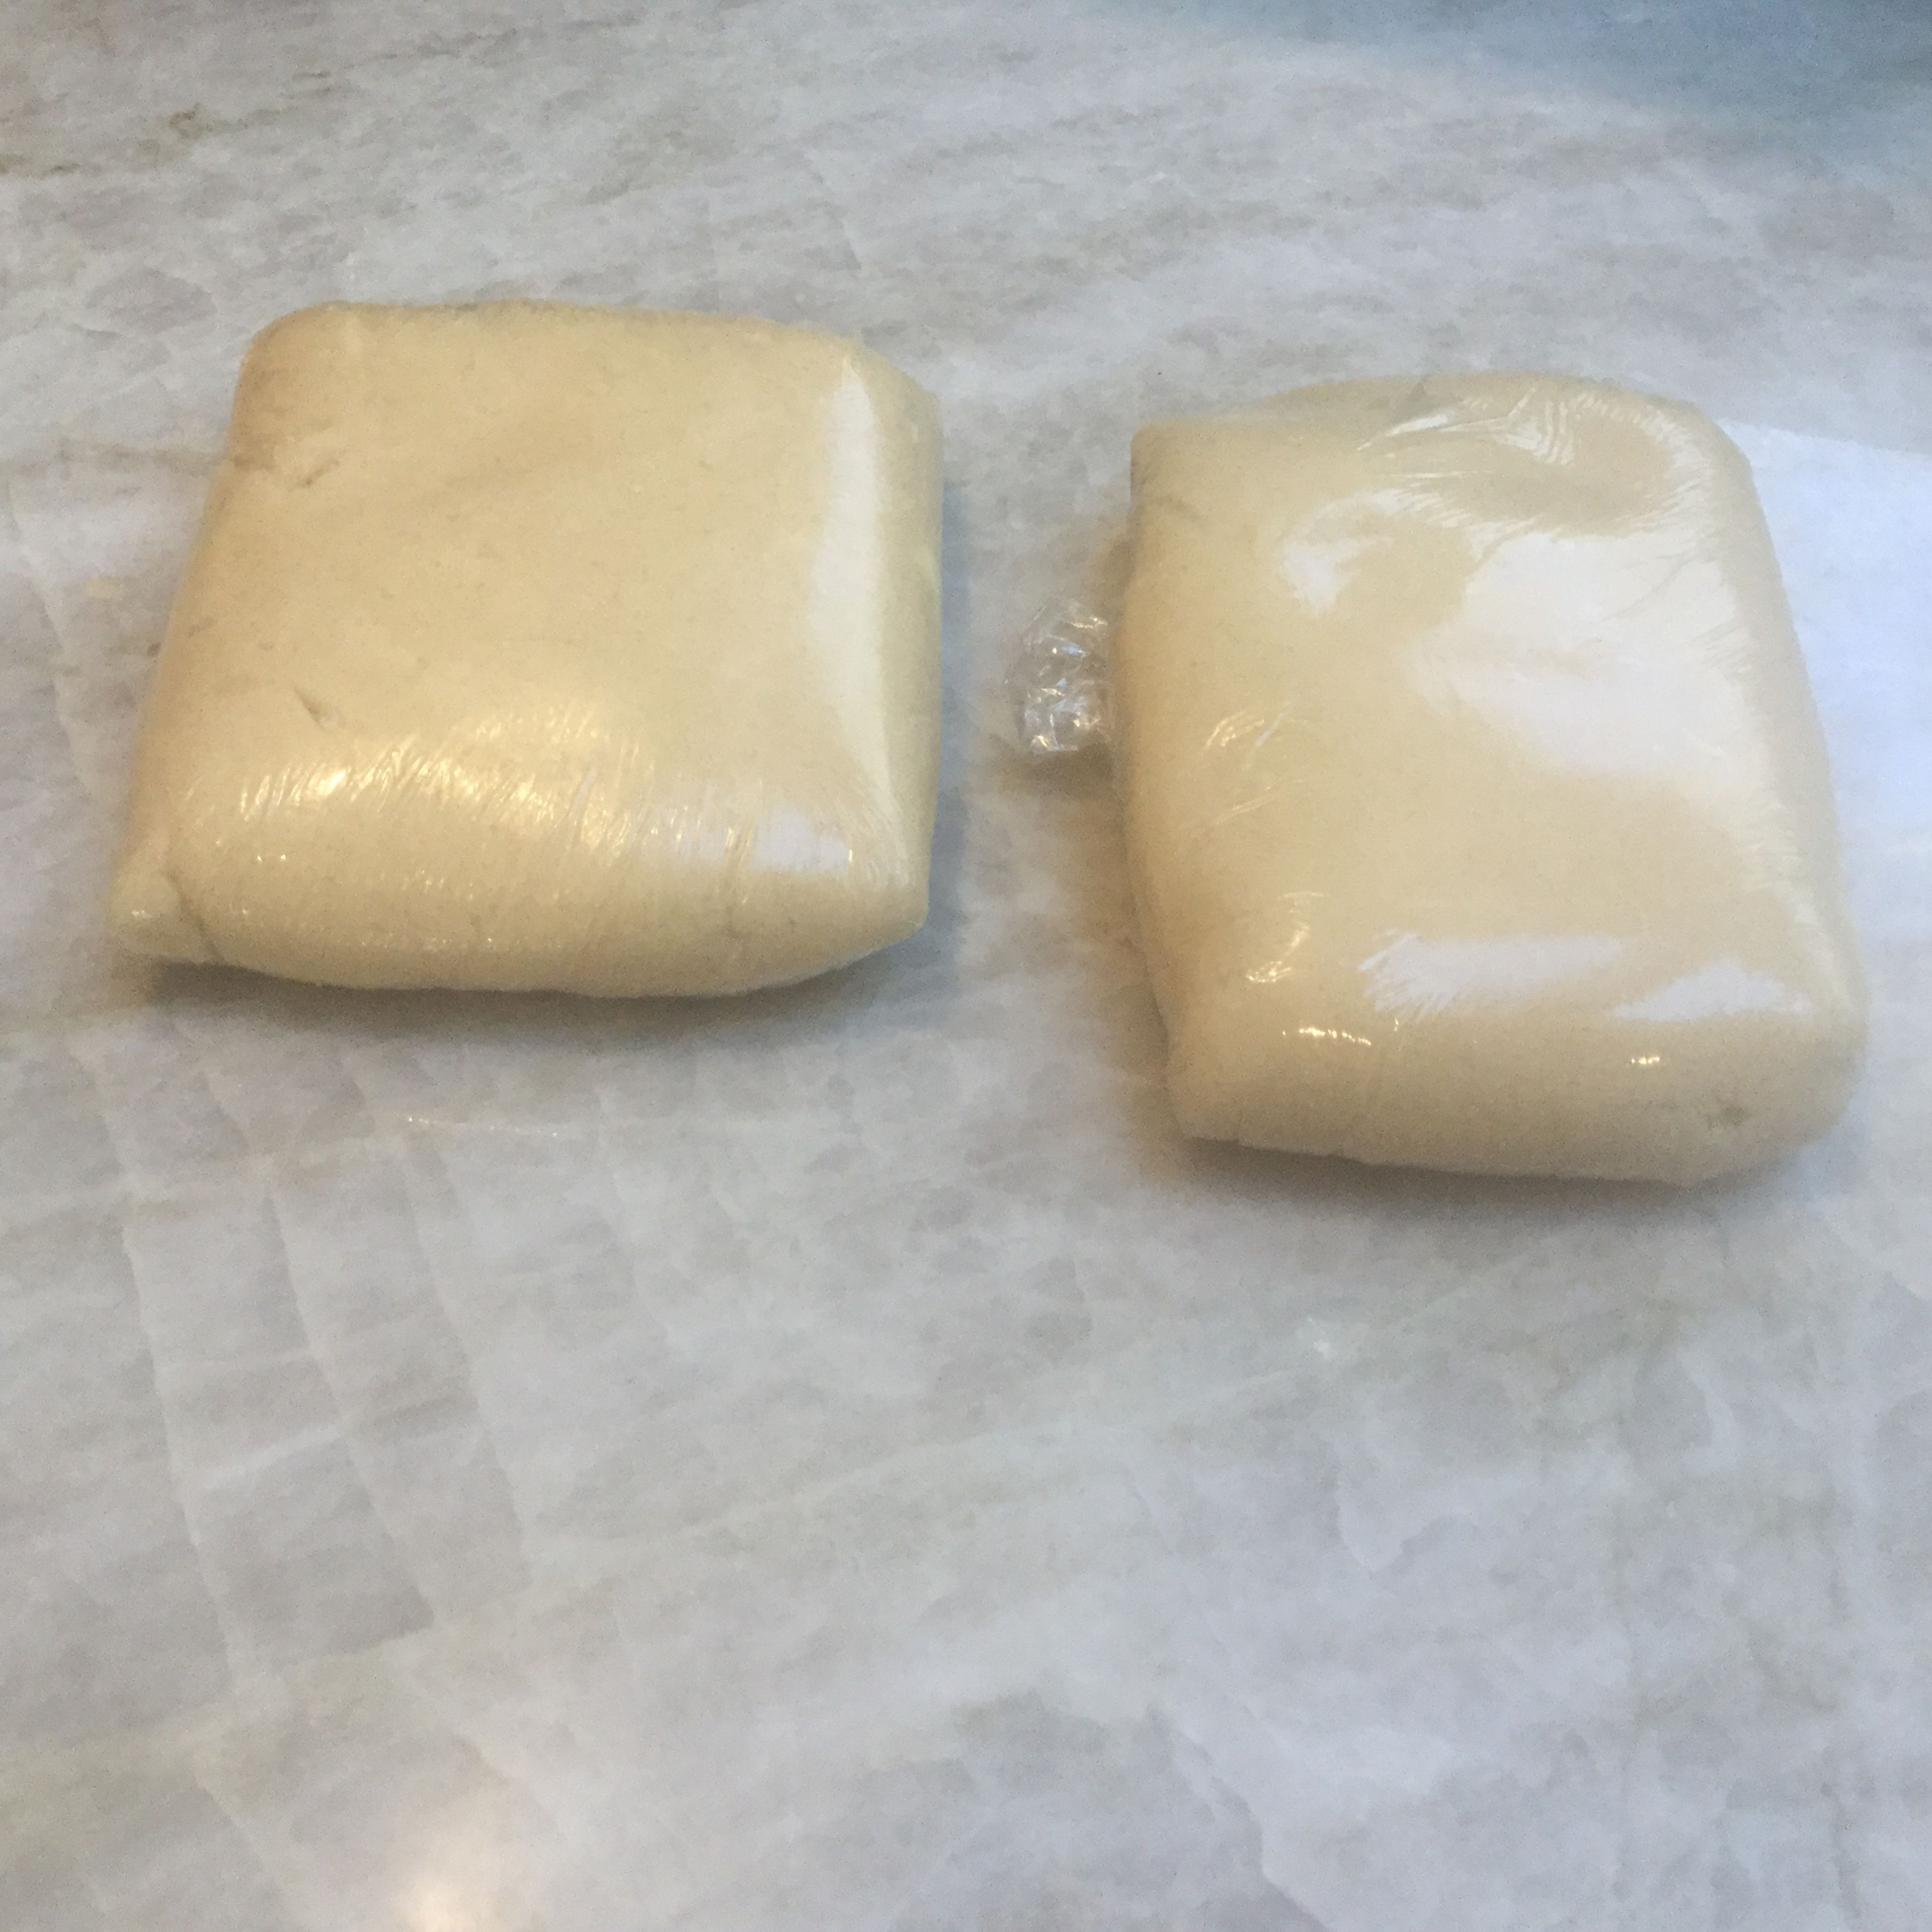 Split the dough in two. Wrap each half in plastic wrap, and let it chill in the fridge for it least one hour.